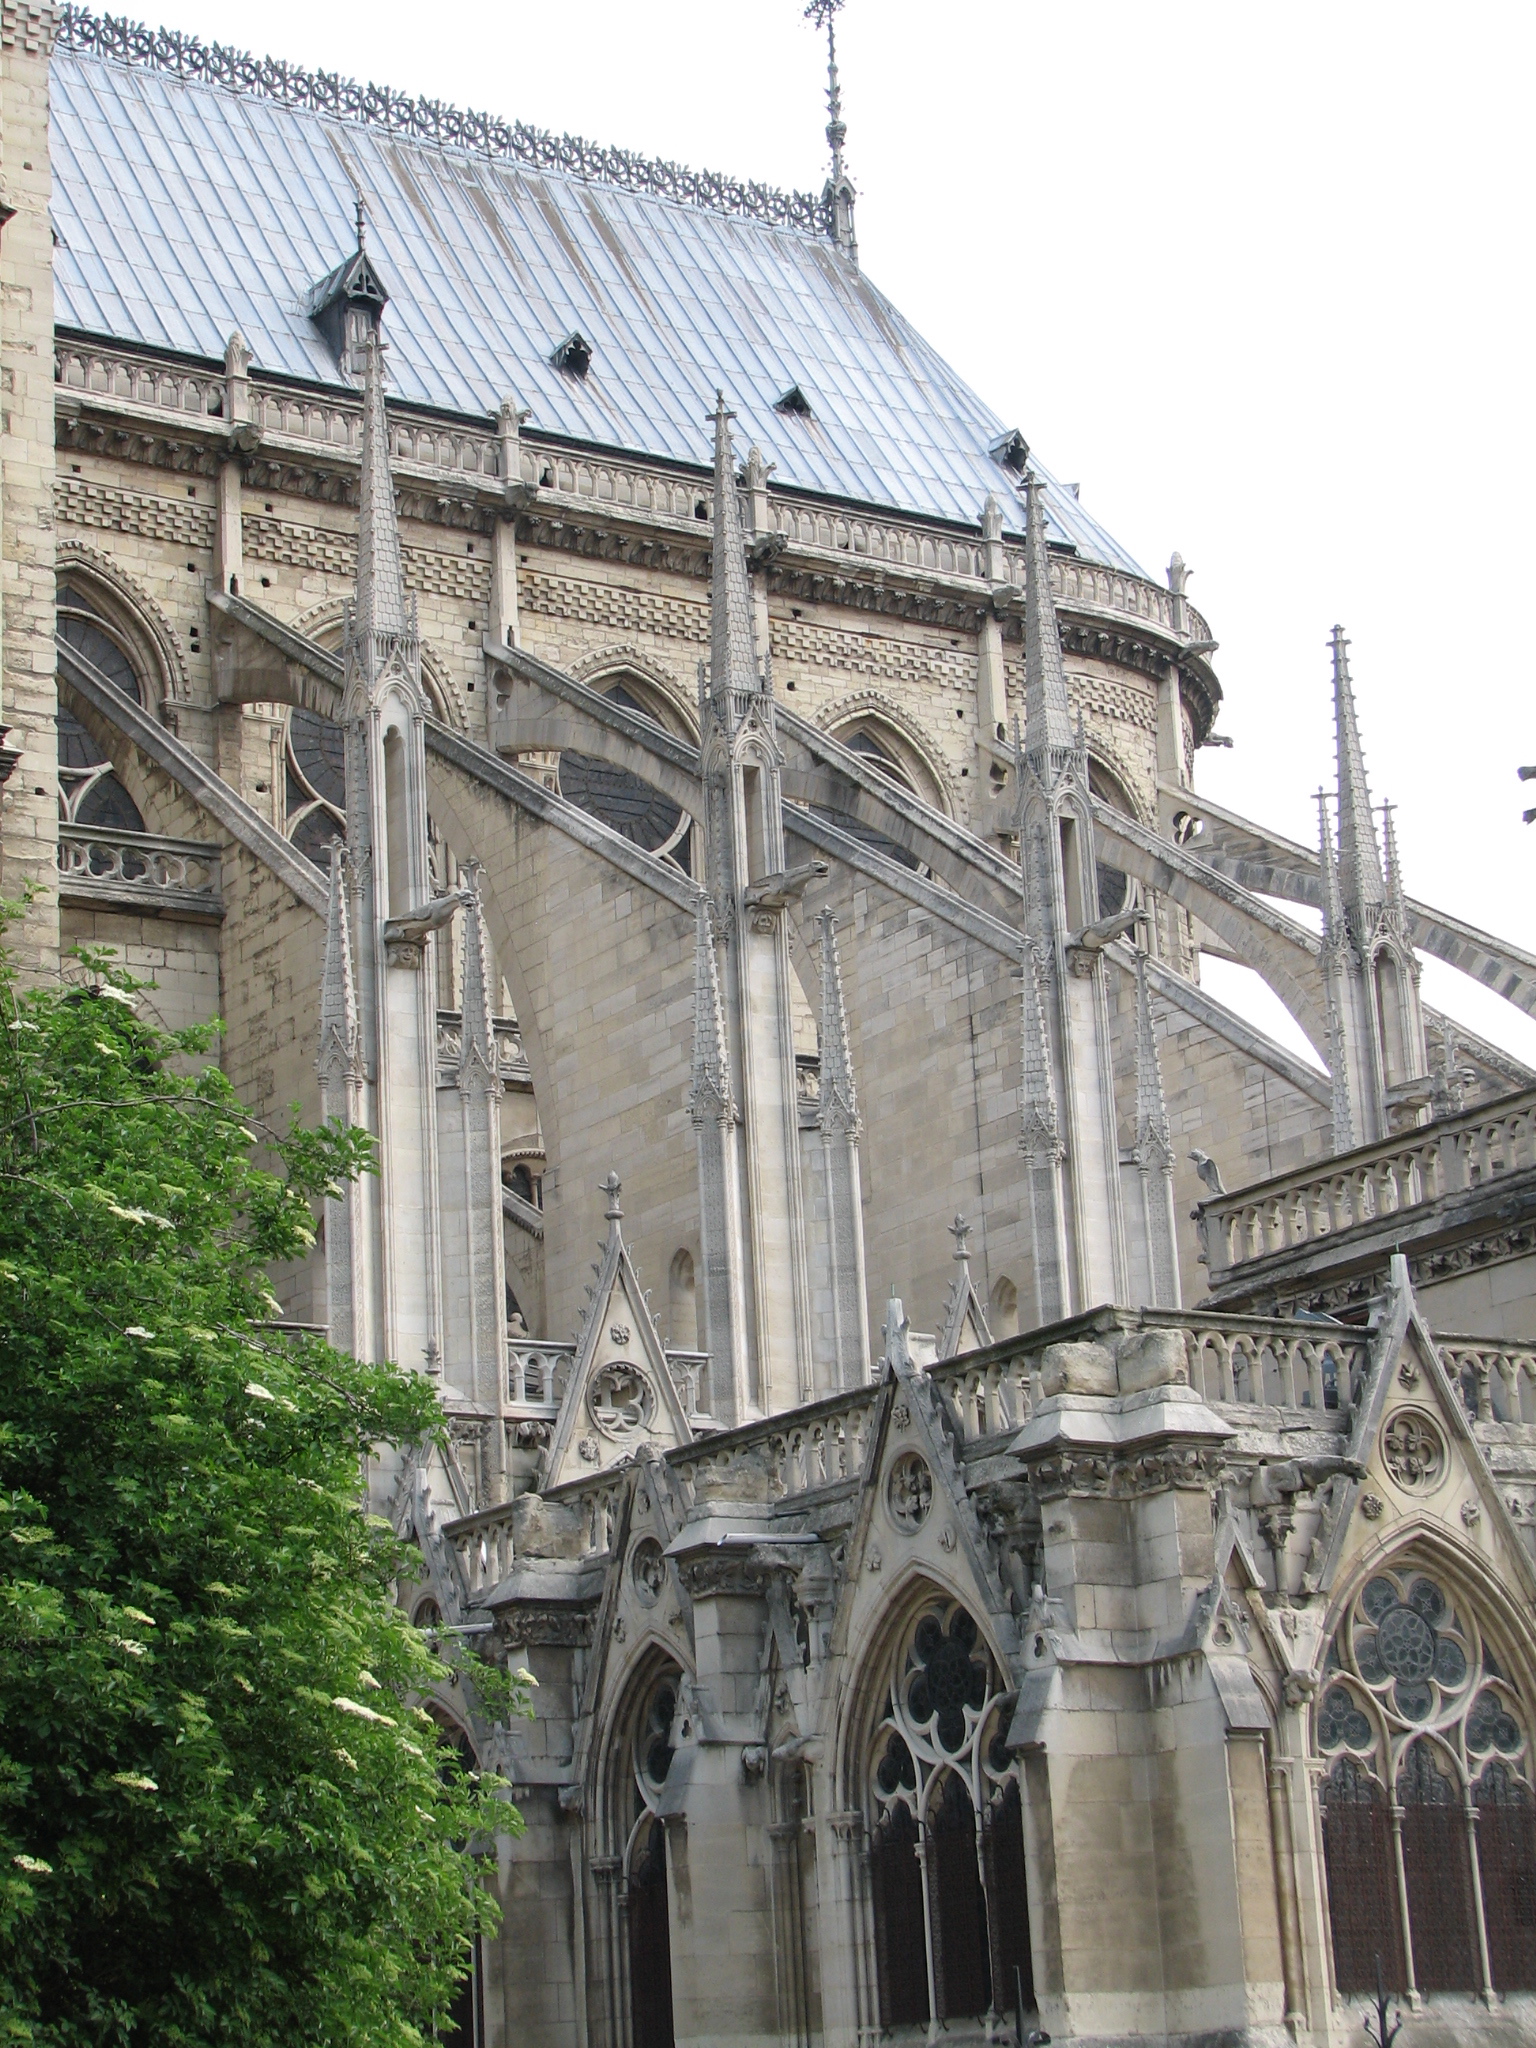 Notre Dame's buttresses